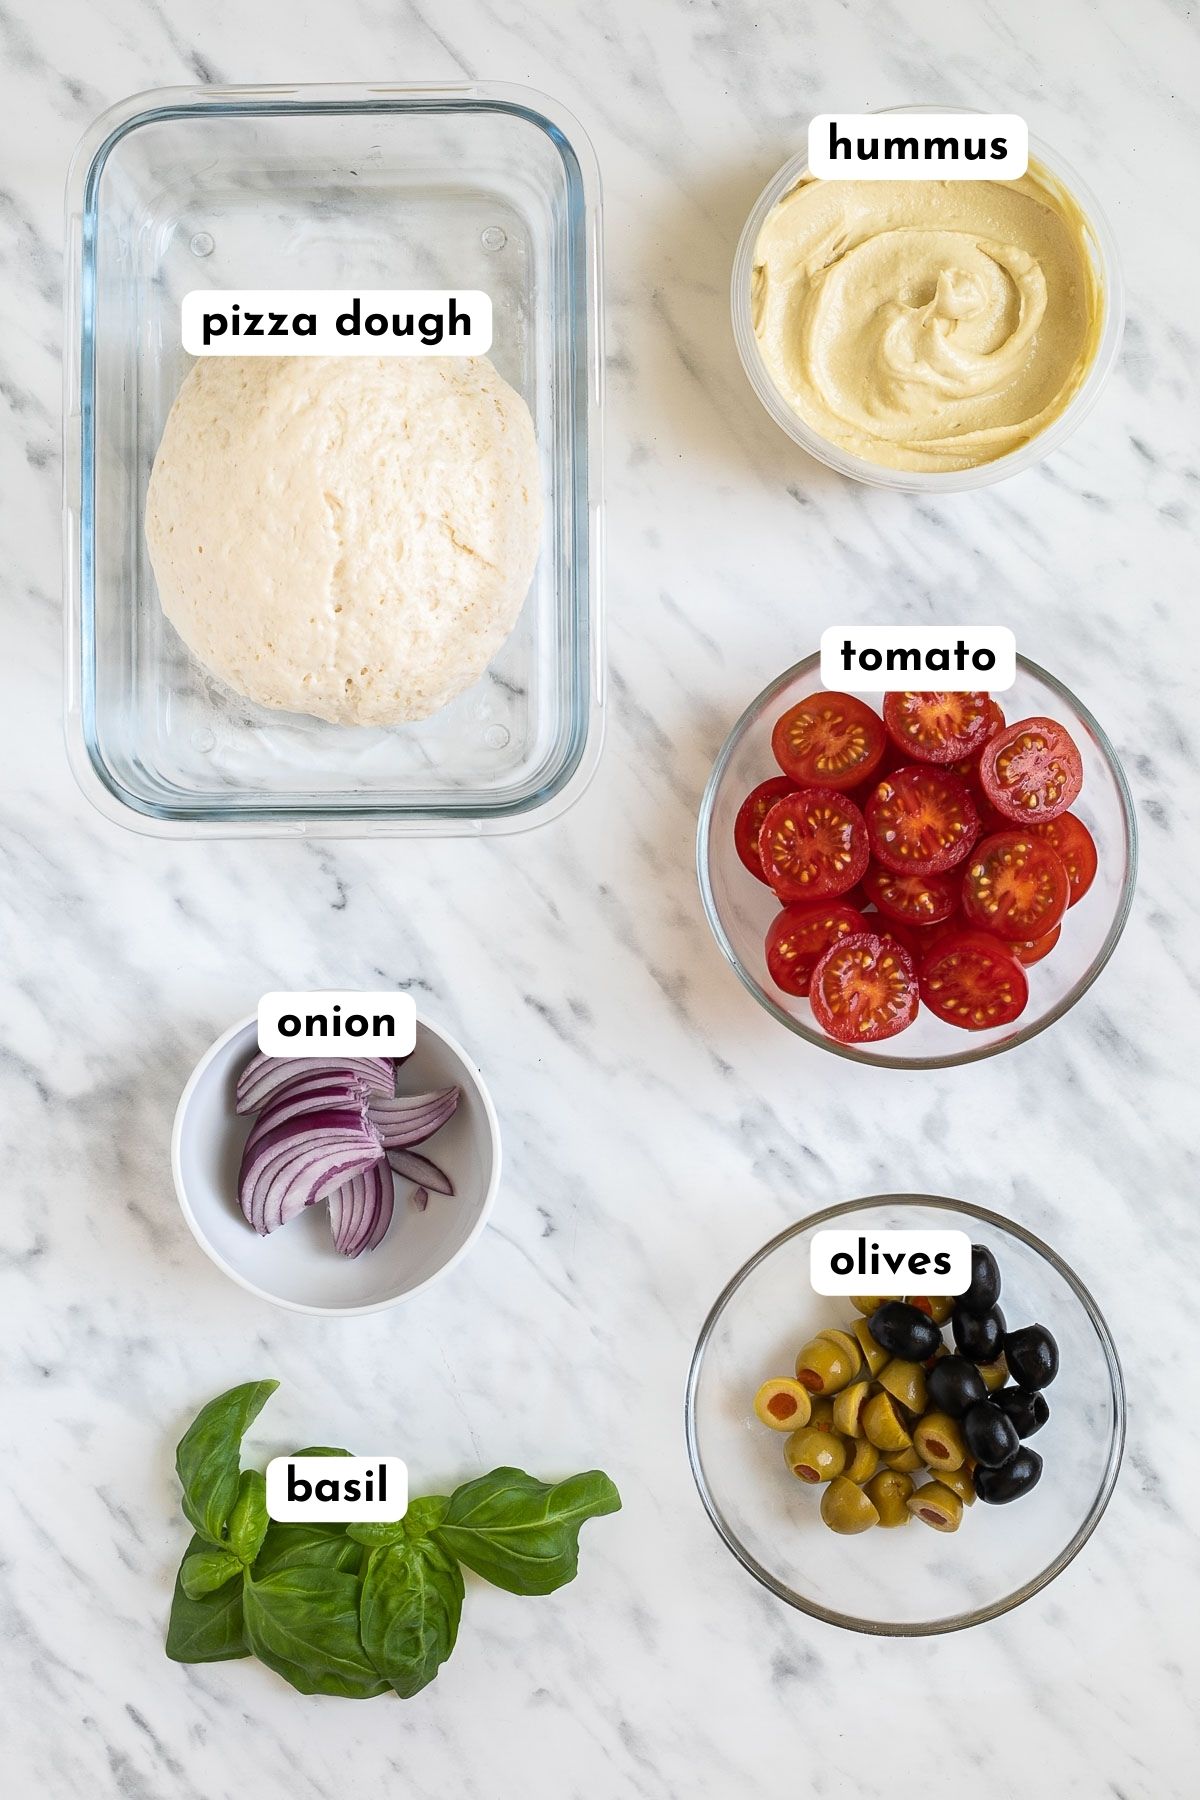 Ingredients of hummus pizza in small containers: pizza dough, hummus, cherry tomatoes, red onion, basil, and olives.